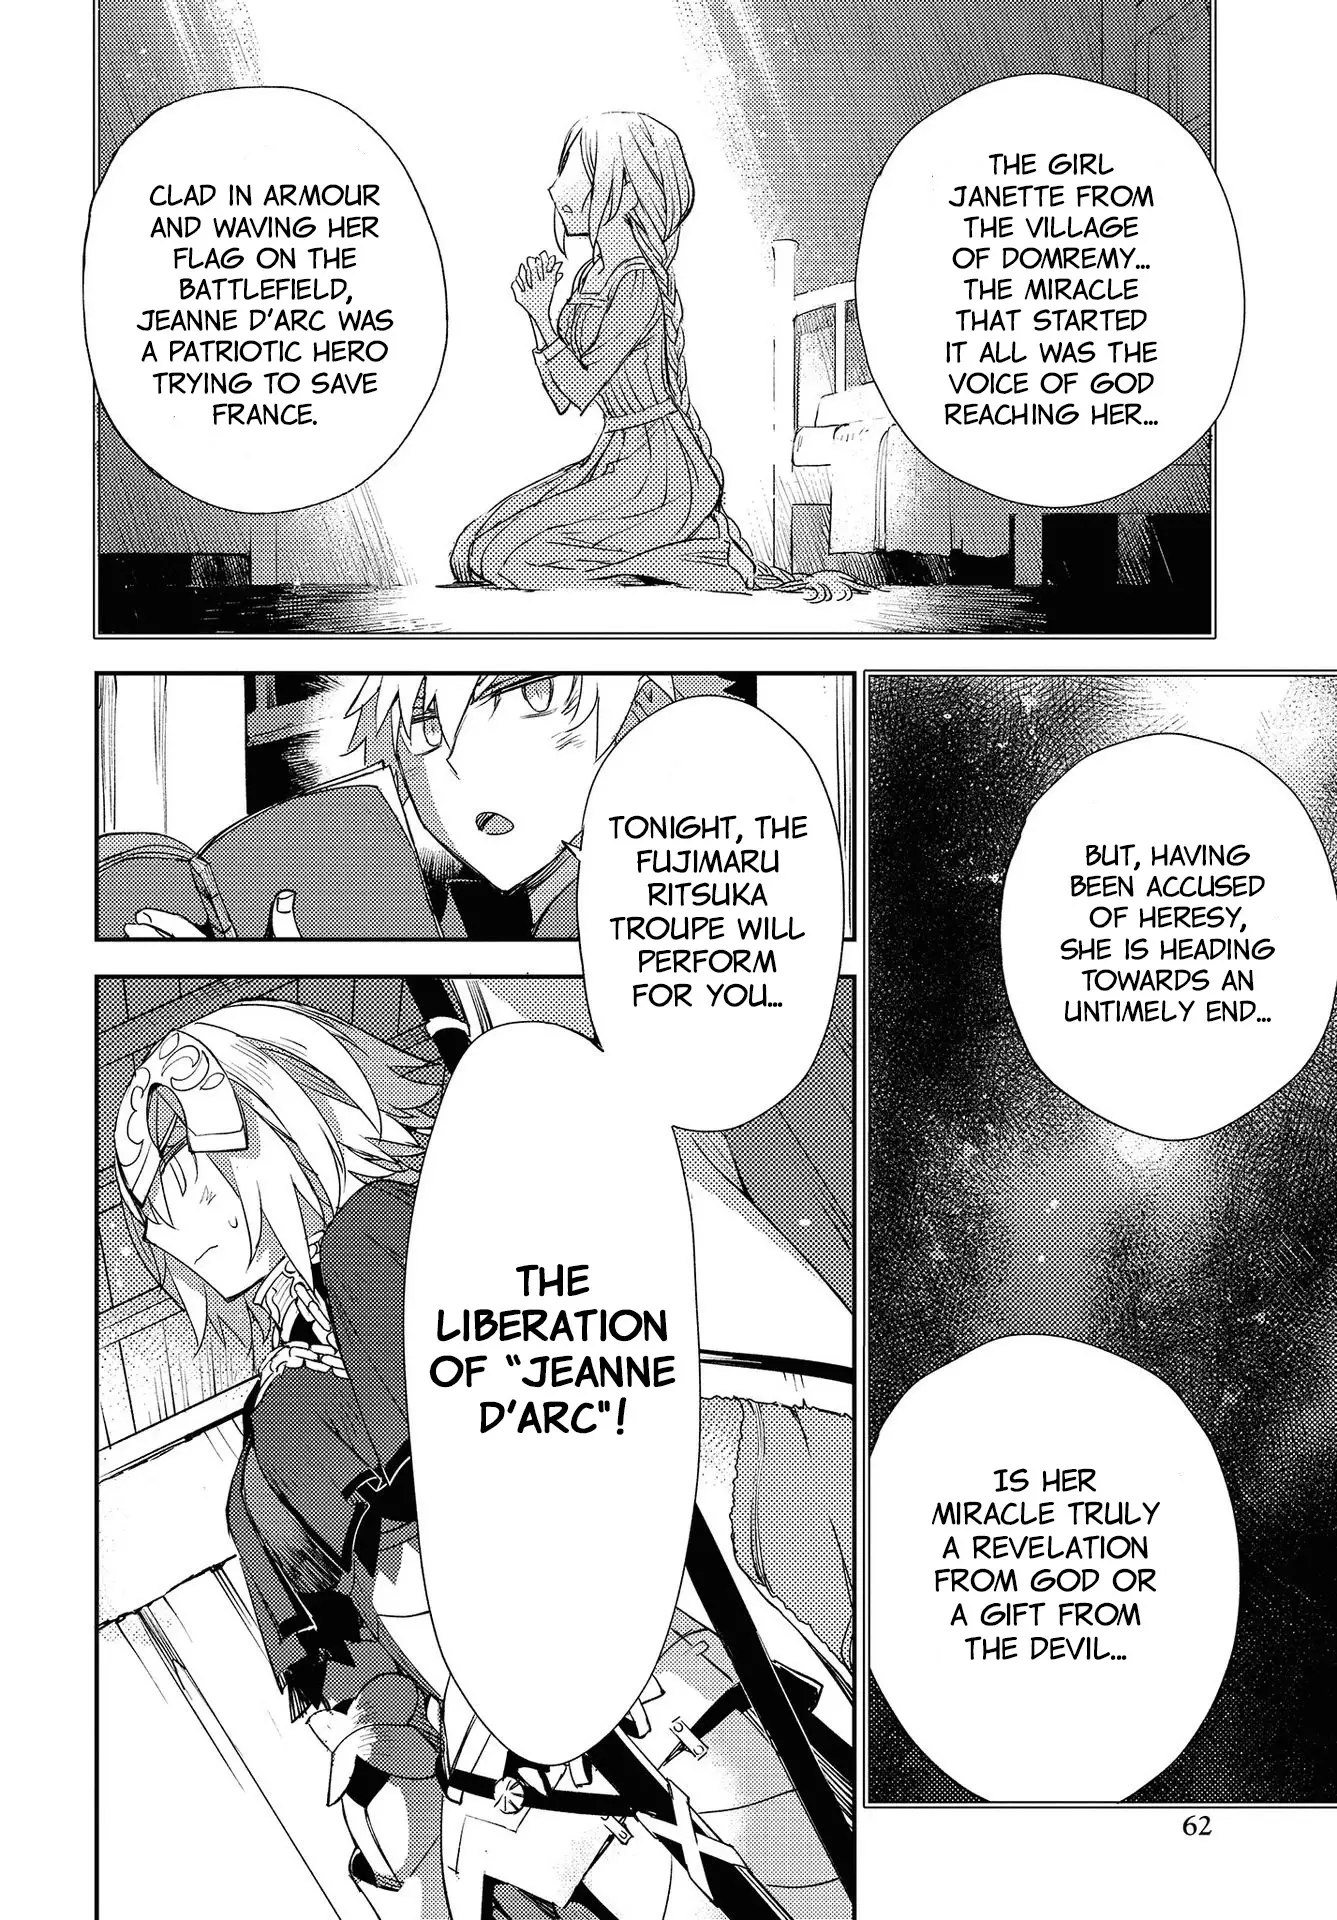 Fate/grand Order: Epic Of Remnant - Subspecies Singularity Iv: Taboo Advent Salem: Salem Of Heresy - 13 page 17